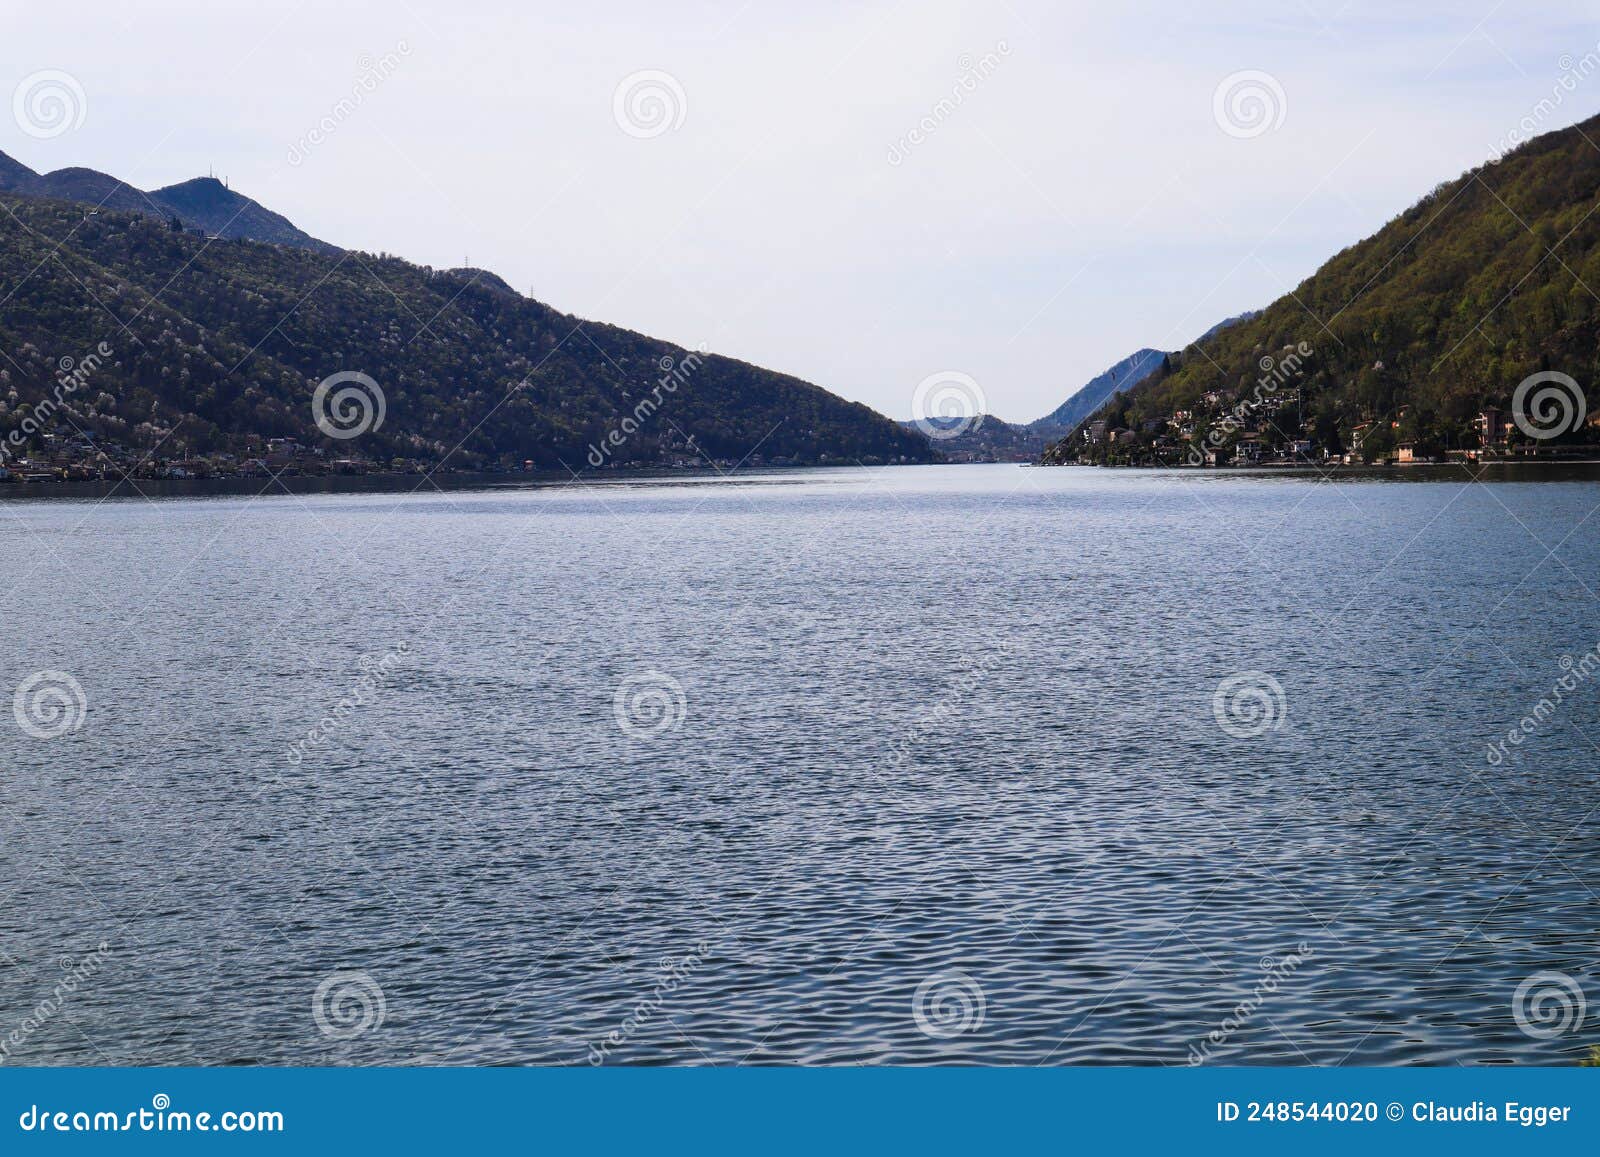 view to the lago lugano from melide, ticino, switzerland